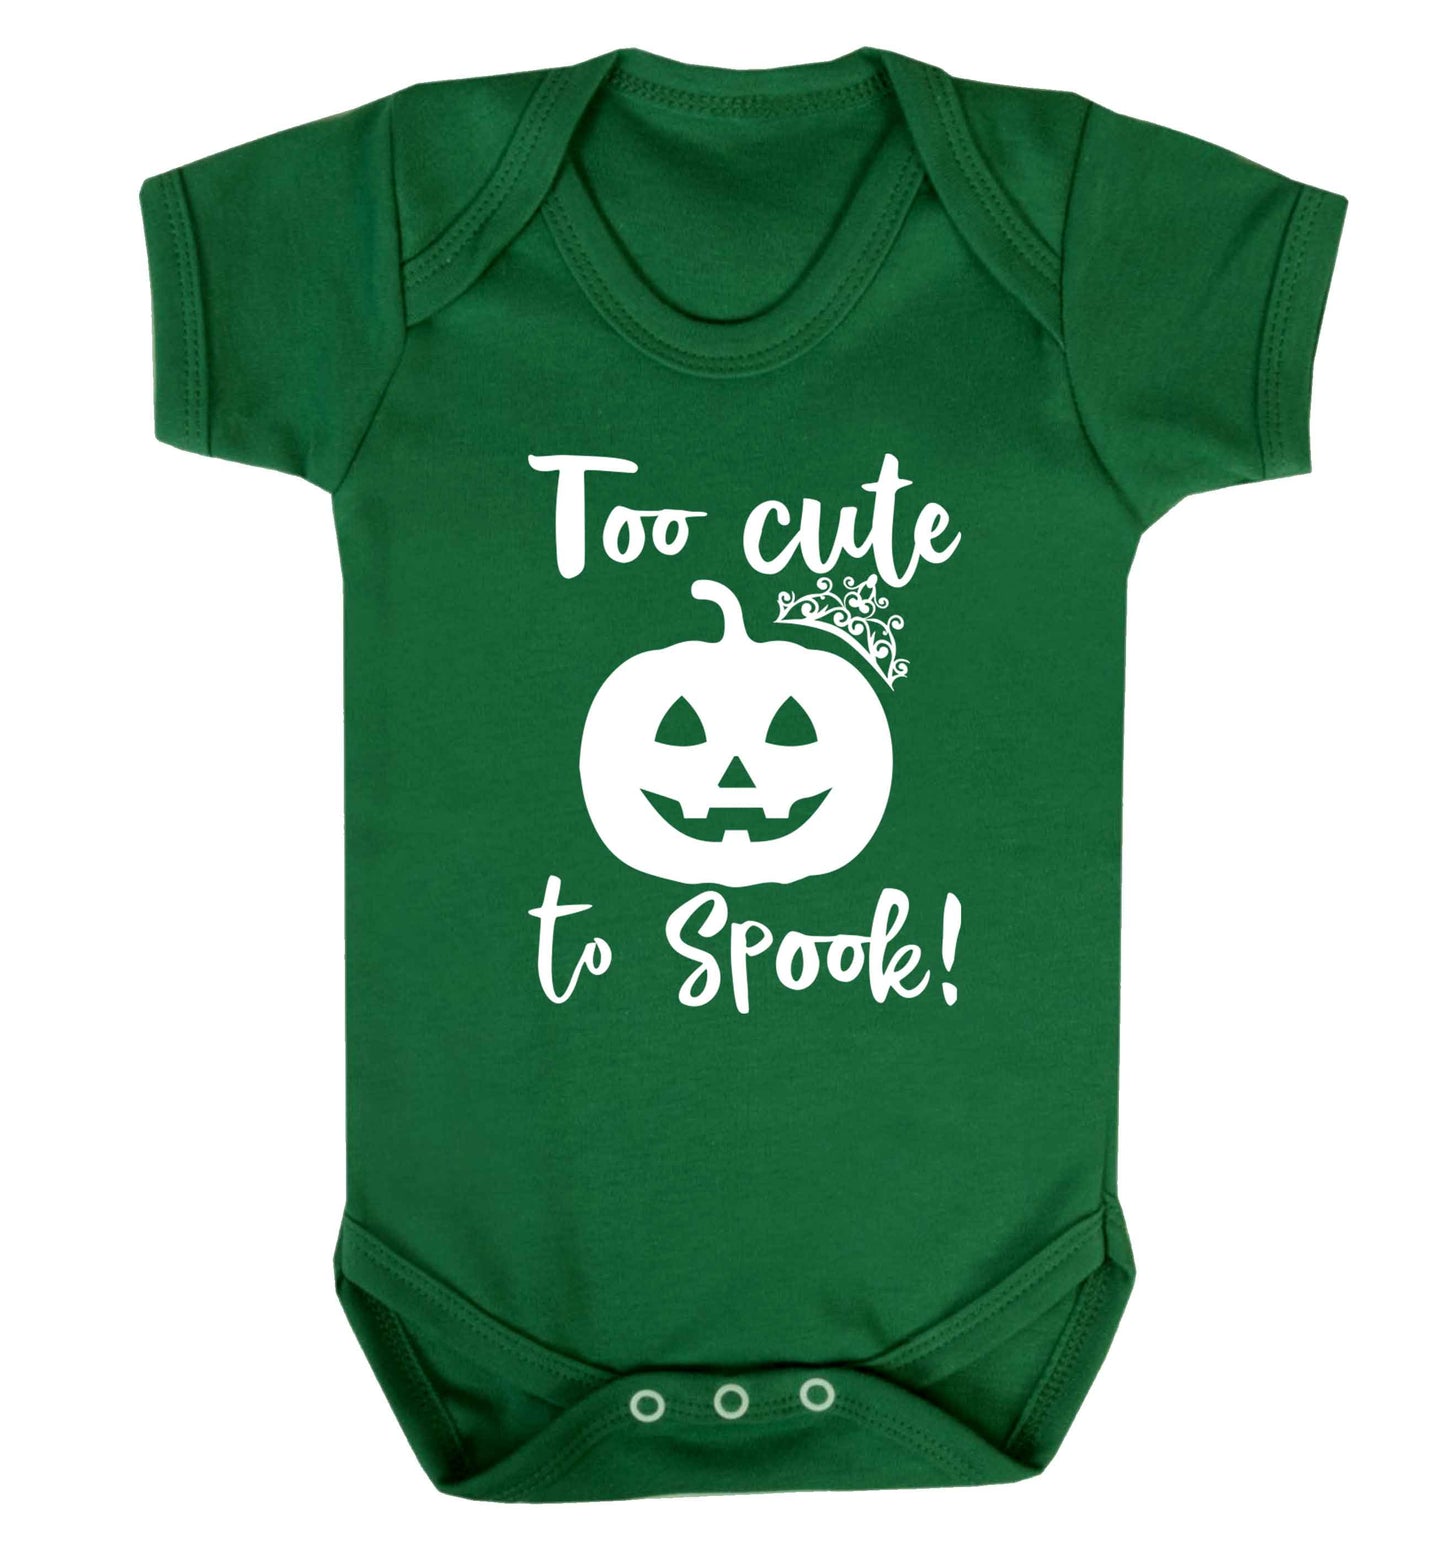 Too cute to spook! Baby Vest green 18-24 months